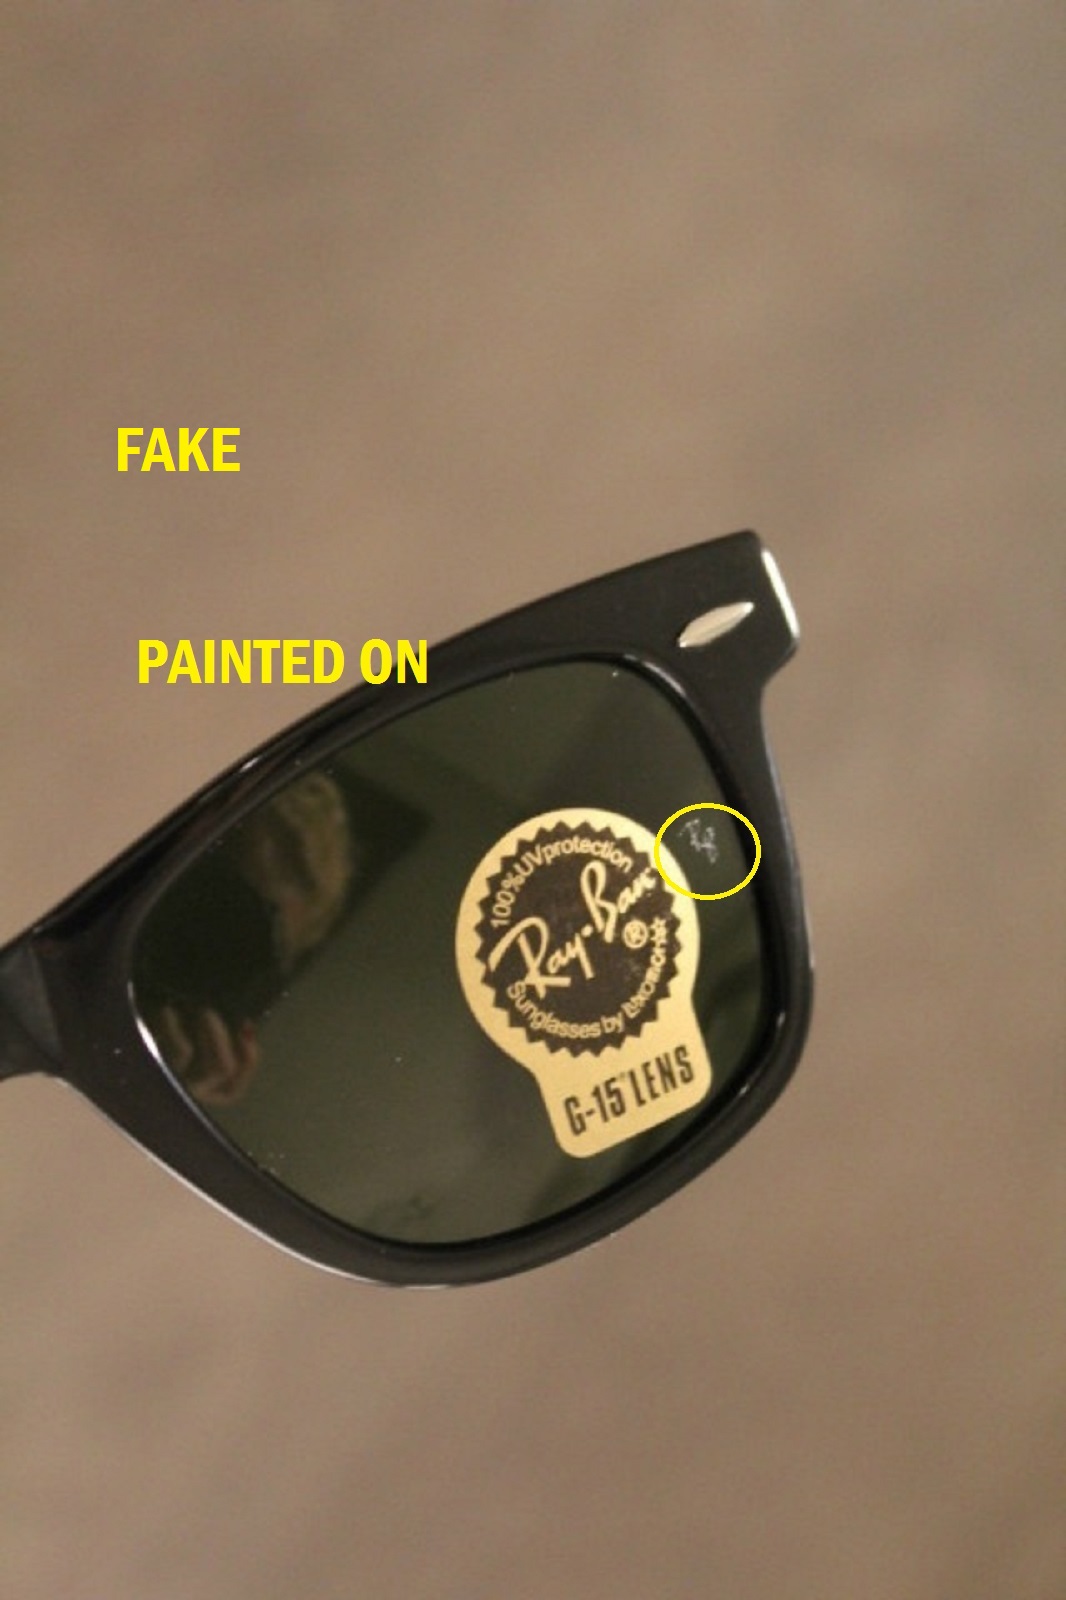 ray ban authenticity